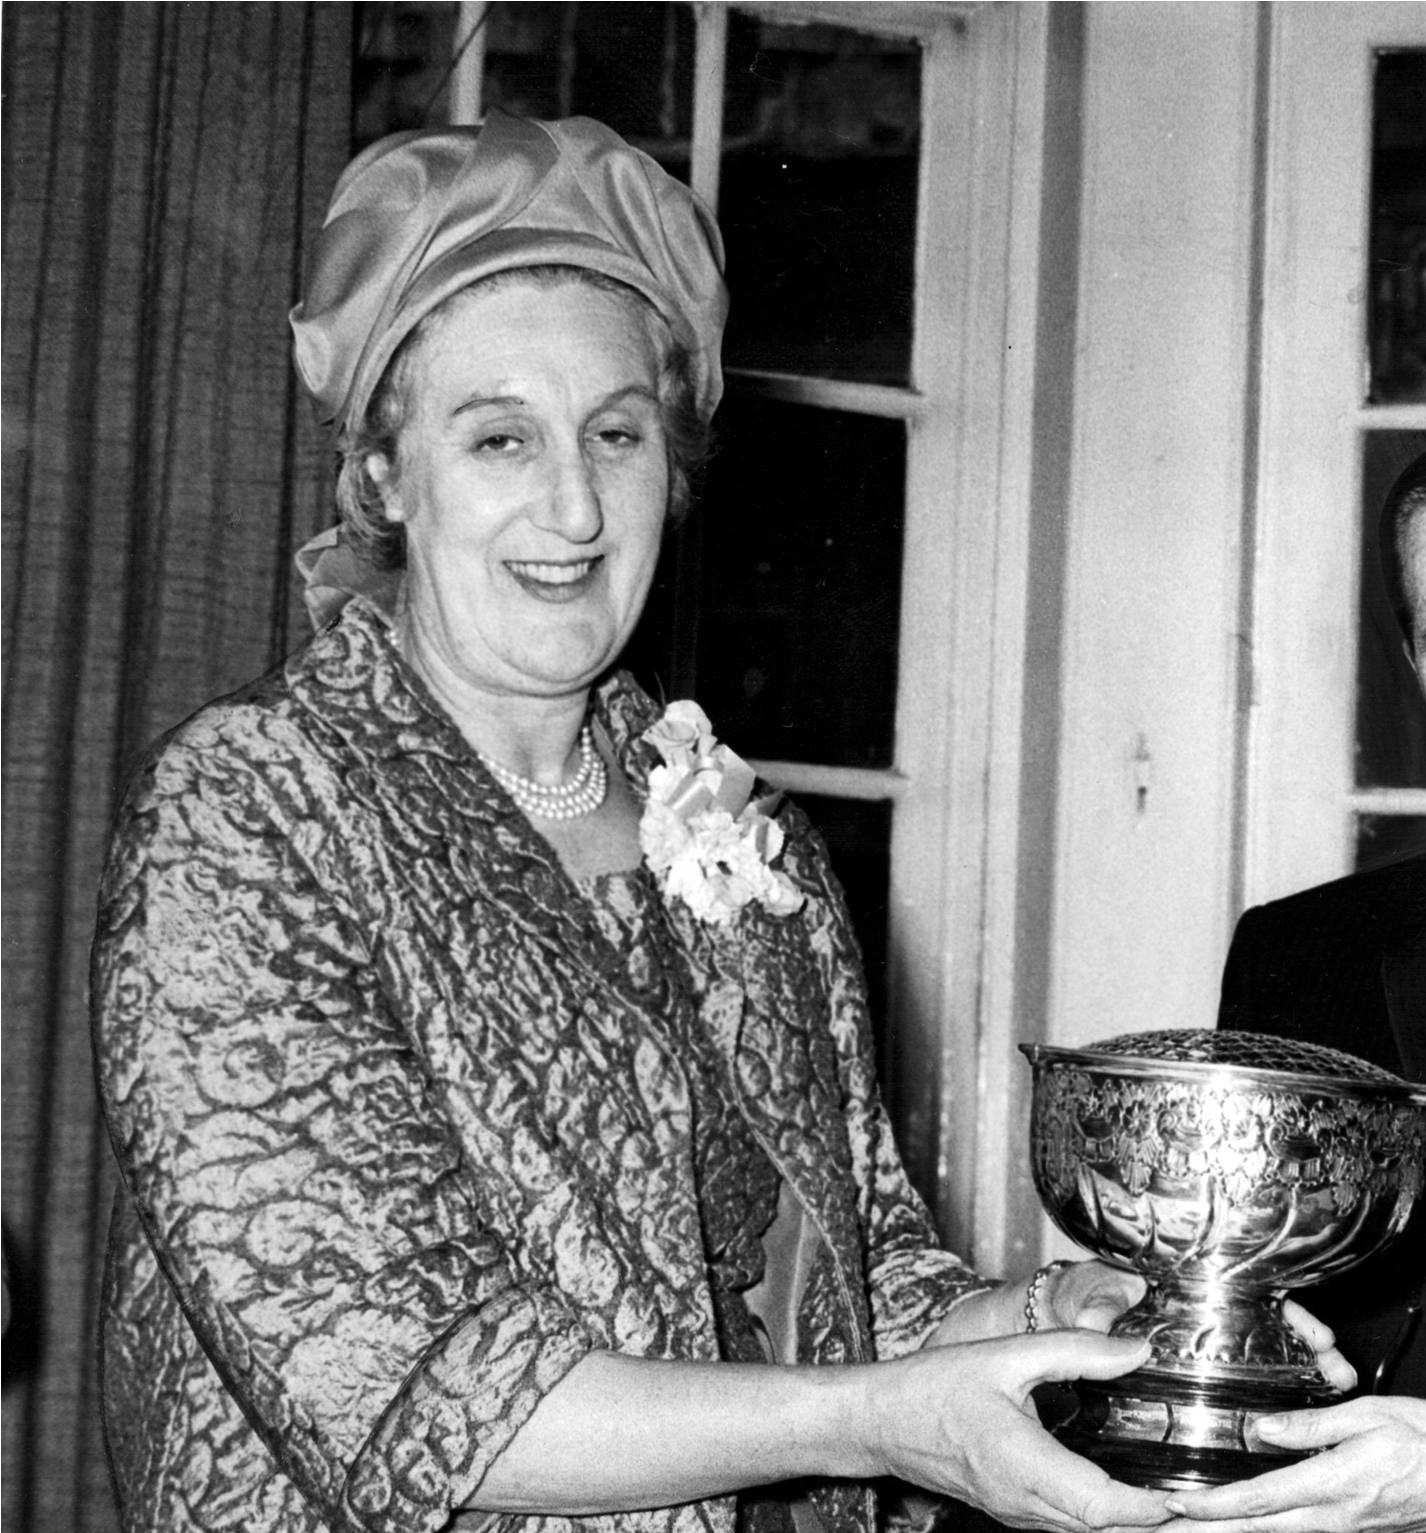 Isobel Murdoch, a finalist in 1963, who went on to win in 1967. Pic: Herald and Times